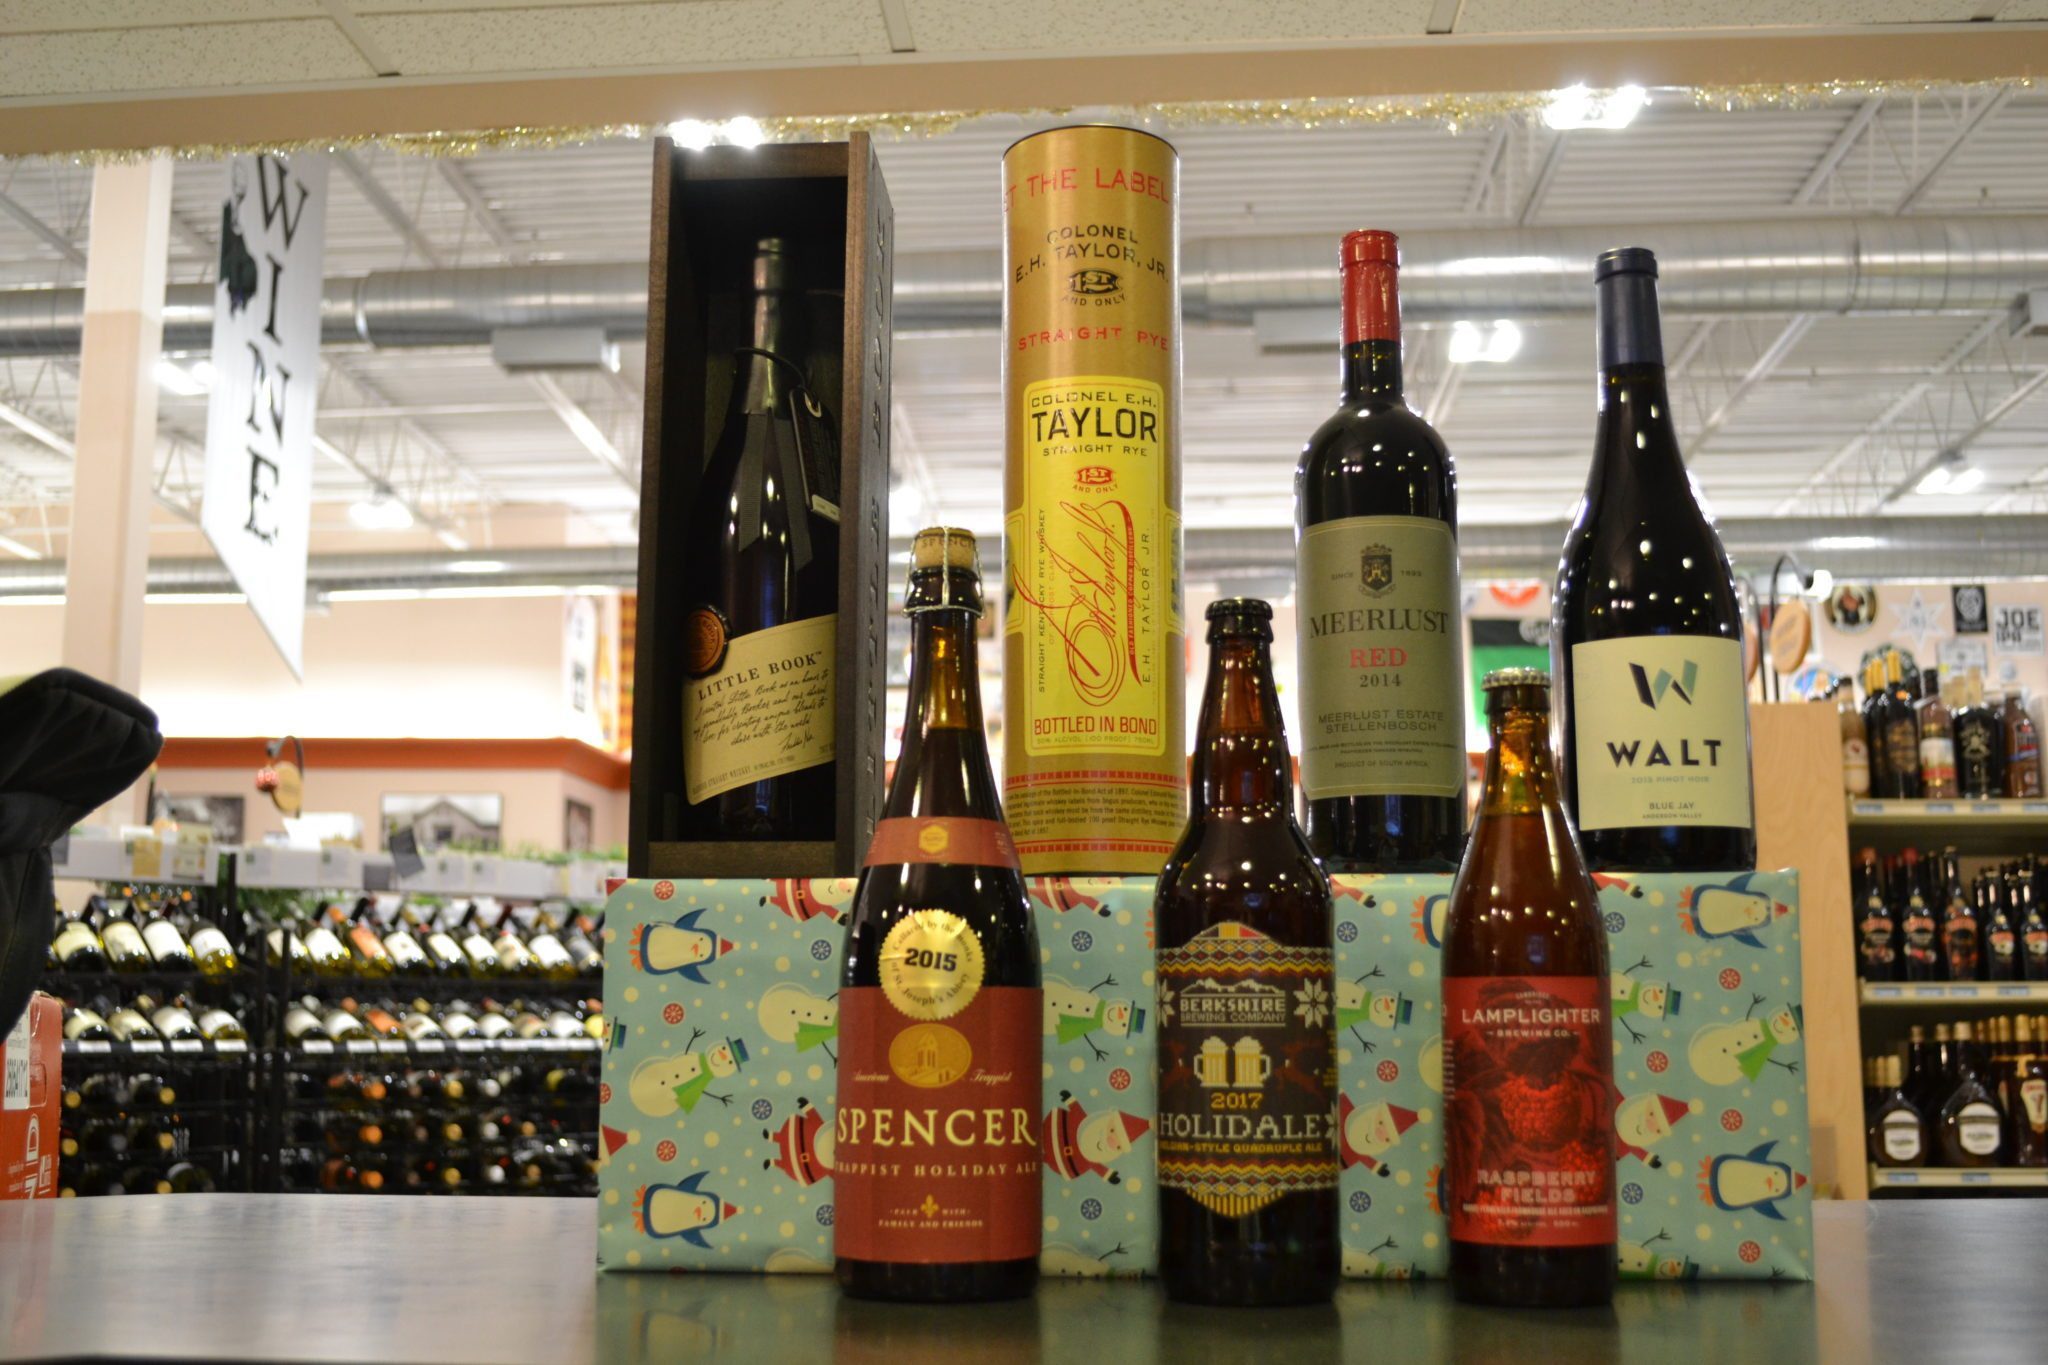 Staff picks, holiday spirit, holiday liquor, happy holidays2017, christmas beer, whiskey, christmas shopping, one stop shop, holiday shopping, rye whiskey, barleywine, pinot noir, south african wine, wild ales, last minute gifts, alcohol is the best gift